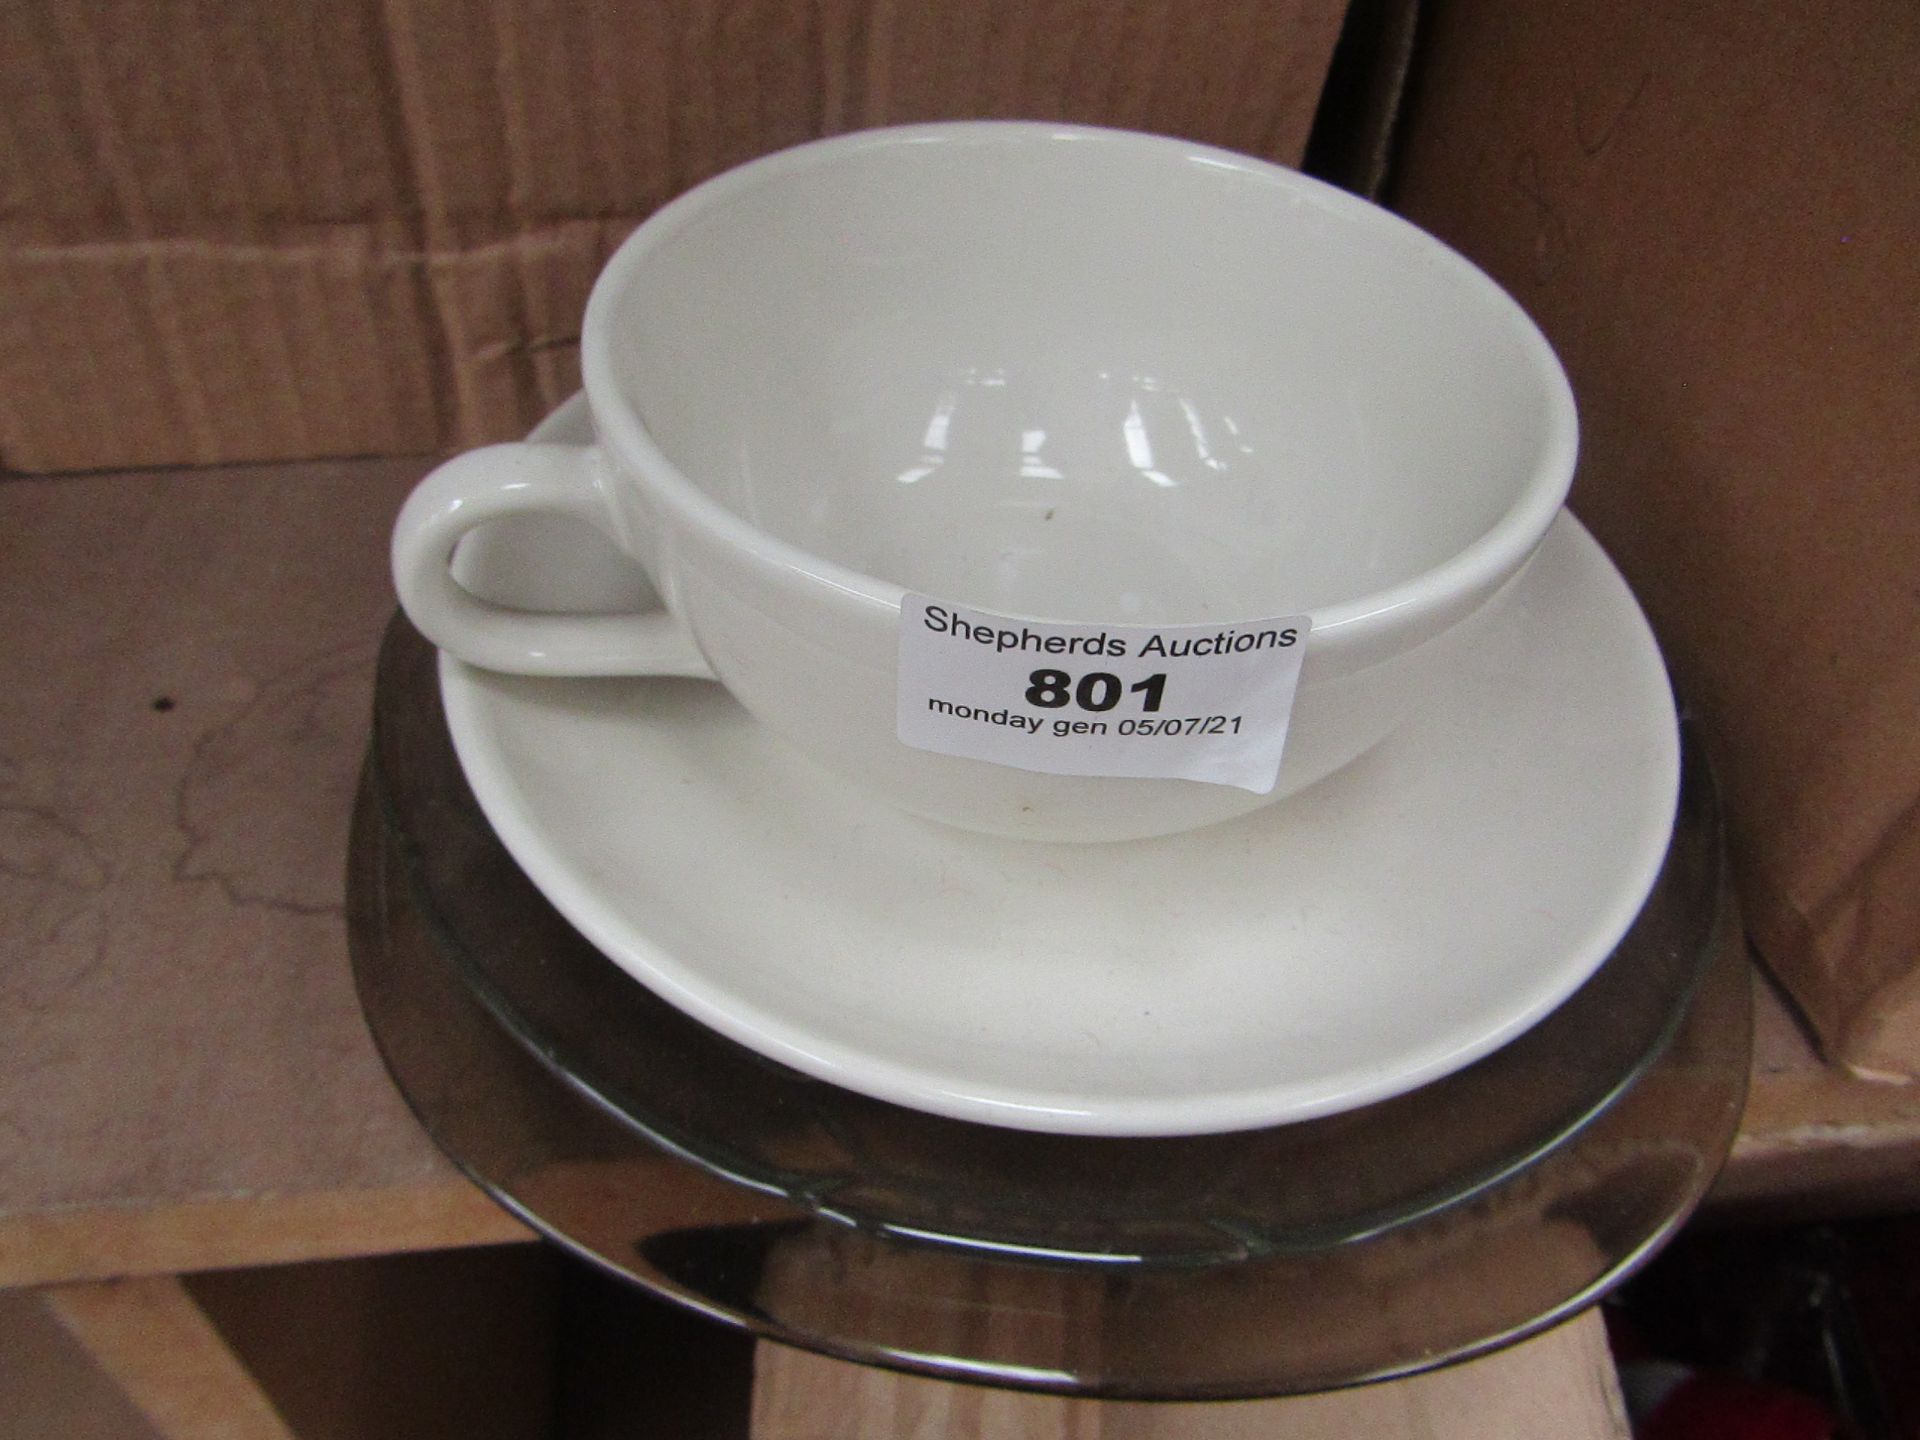 1X CUP AND VARIOUS SAUCERS, ALL NOT IN ORIGINAL PACKAGE, LOOK UNUSED, SEE PICTURE.